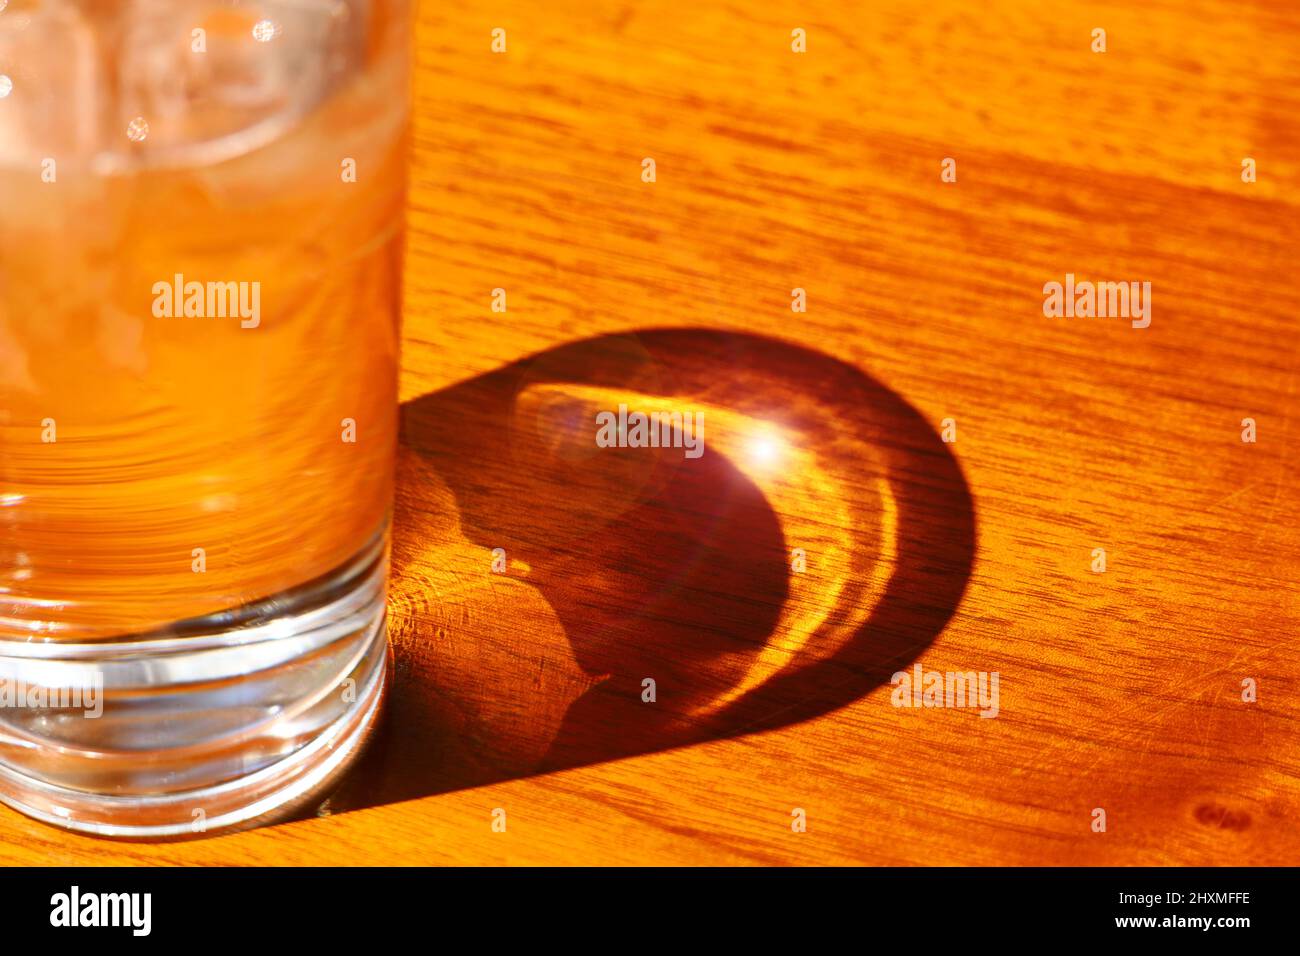 Light and shadow on the table where the sun shines through a cold glass of ice and water Stock Photo